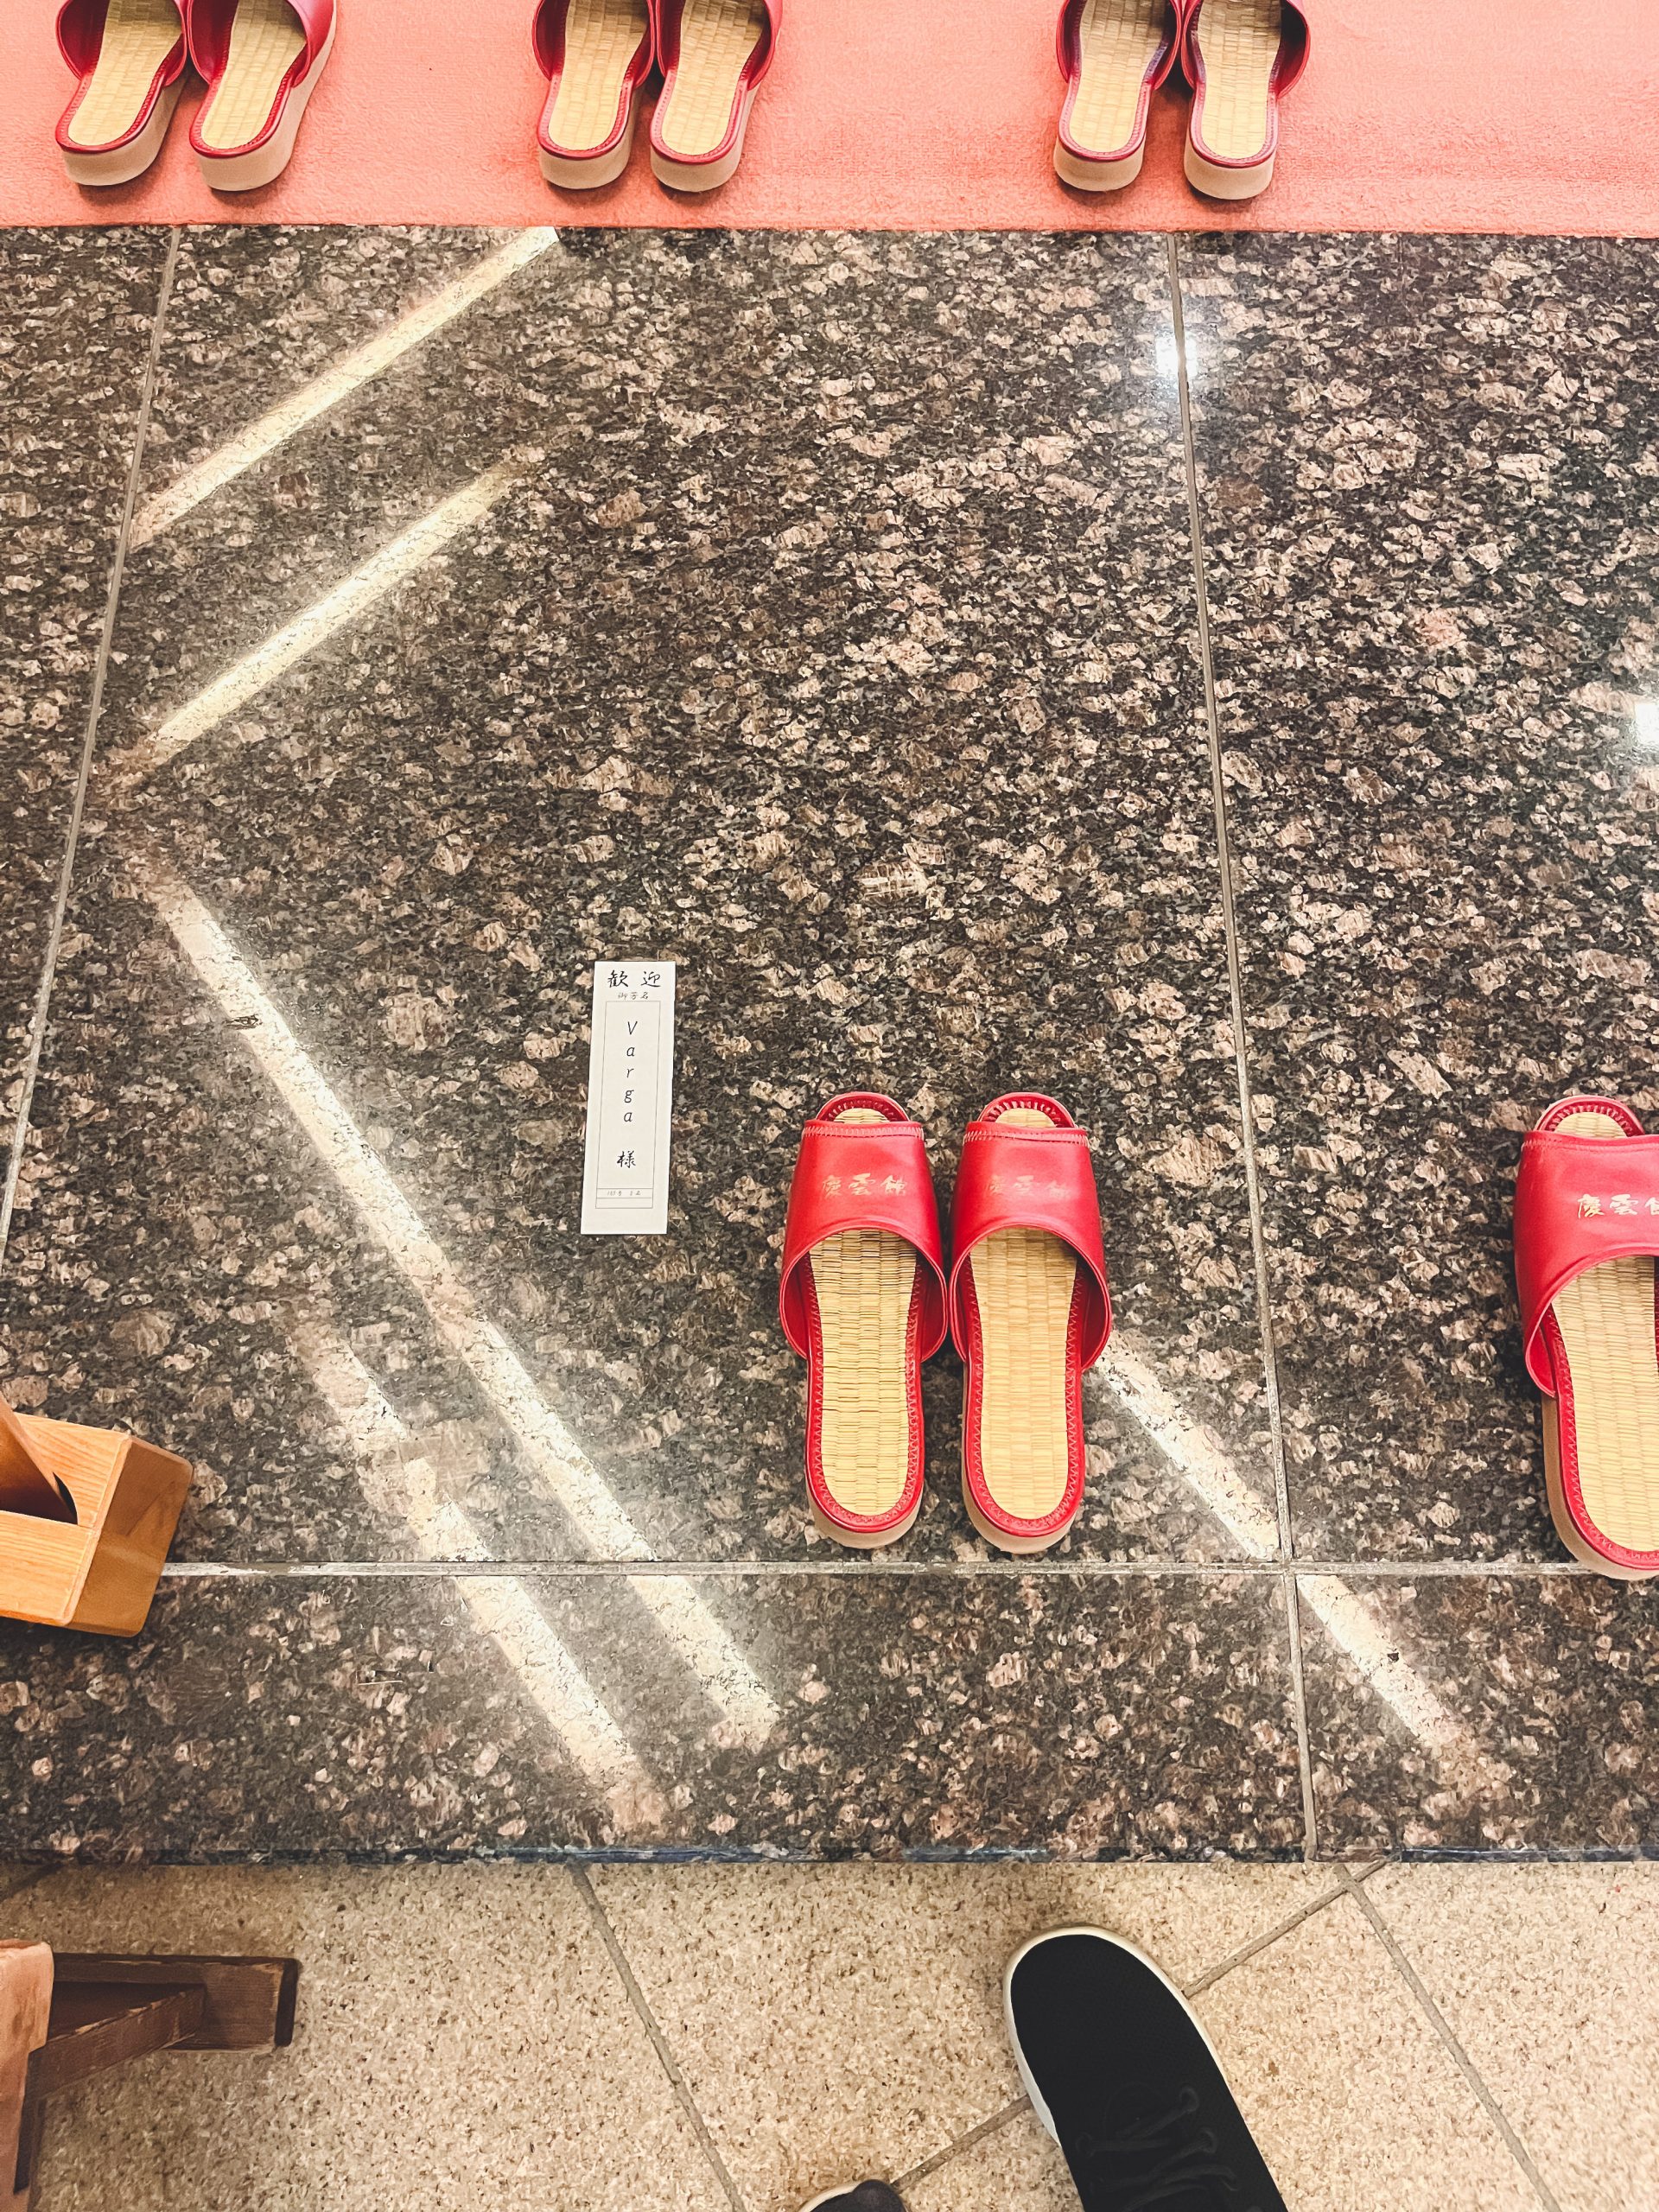 Our surname at the lobby with slippers prepared Nishiyama Onsen Keiunkan